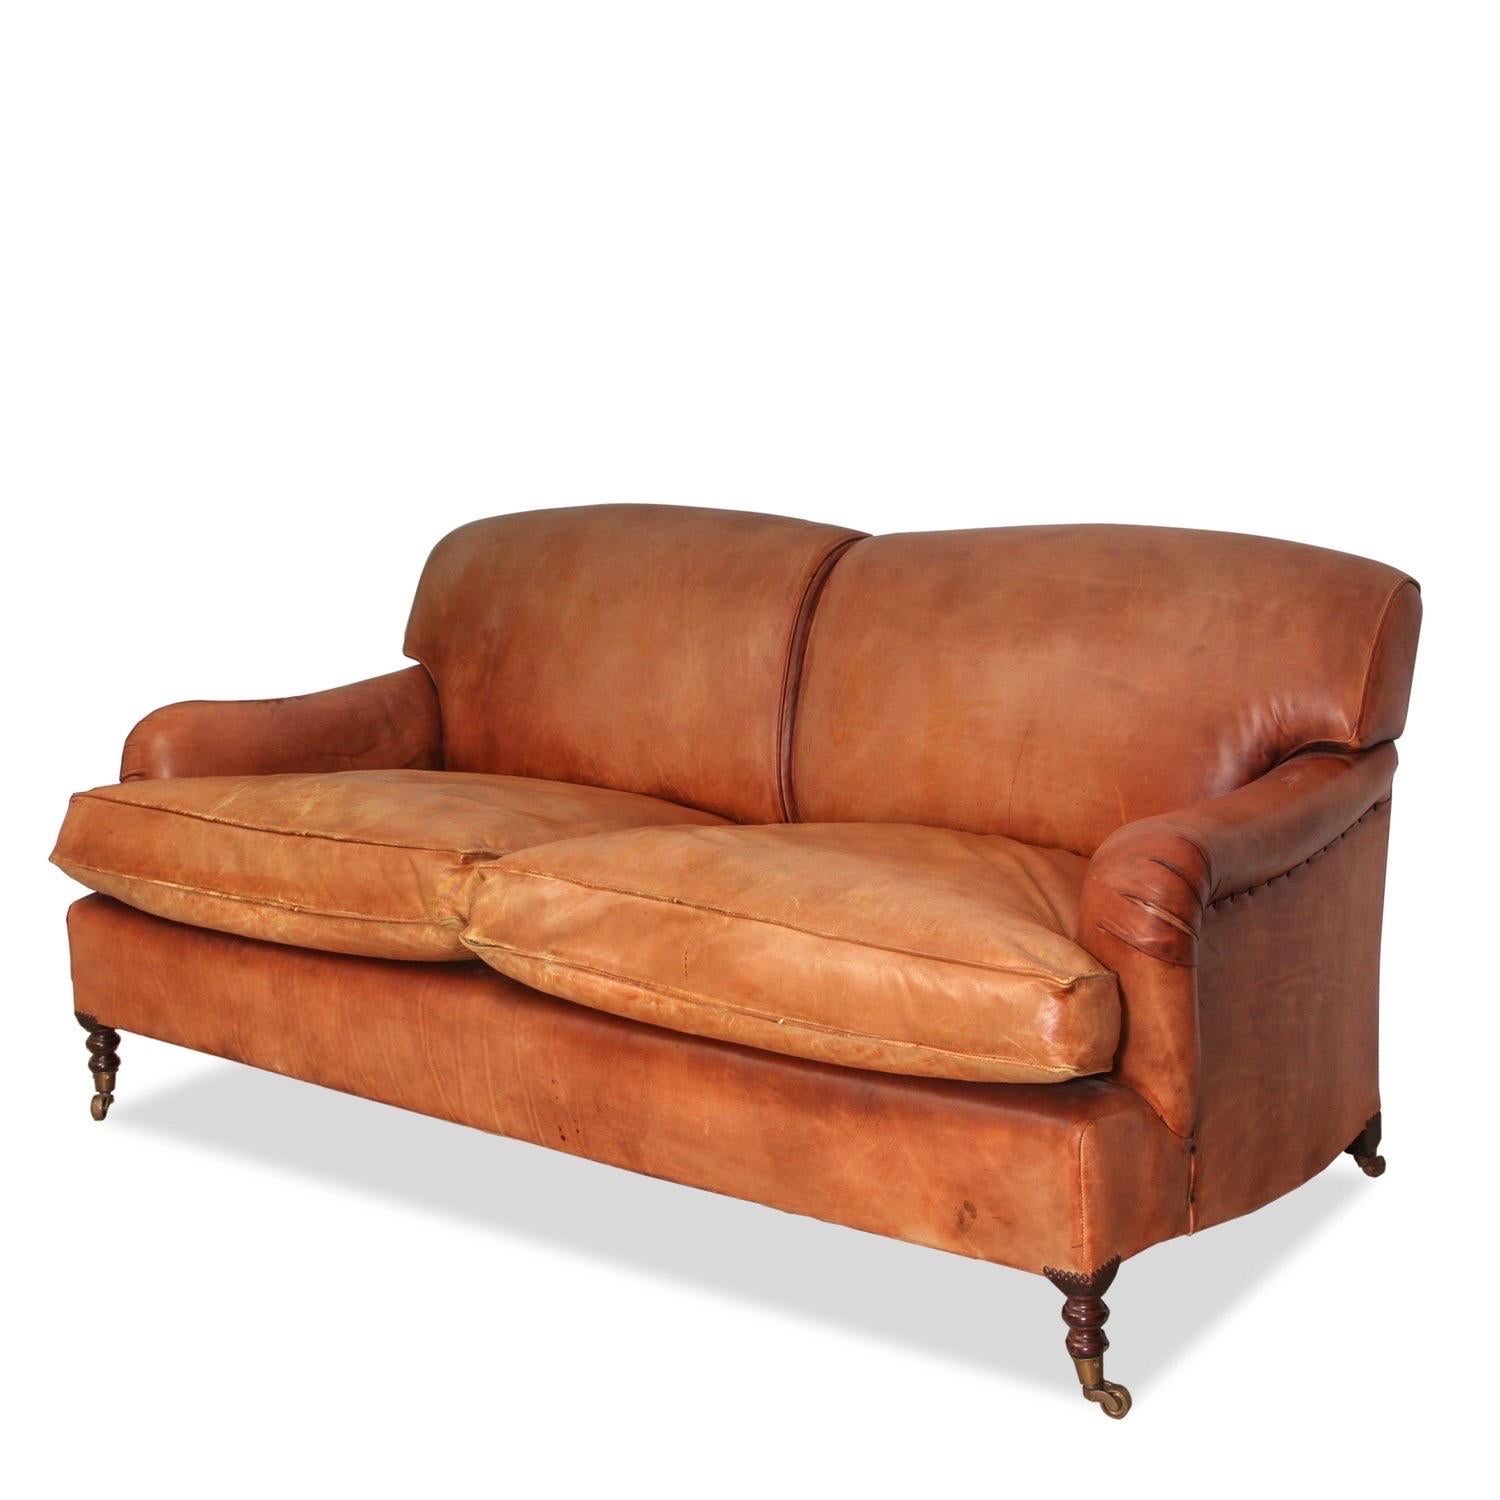 English George Smith Cognac Leather Loveseat For Sale